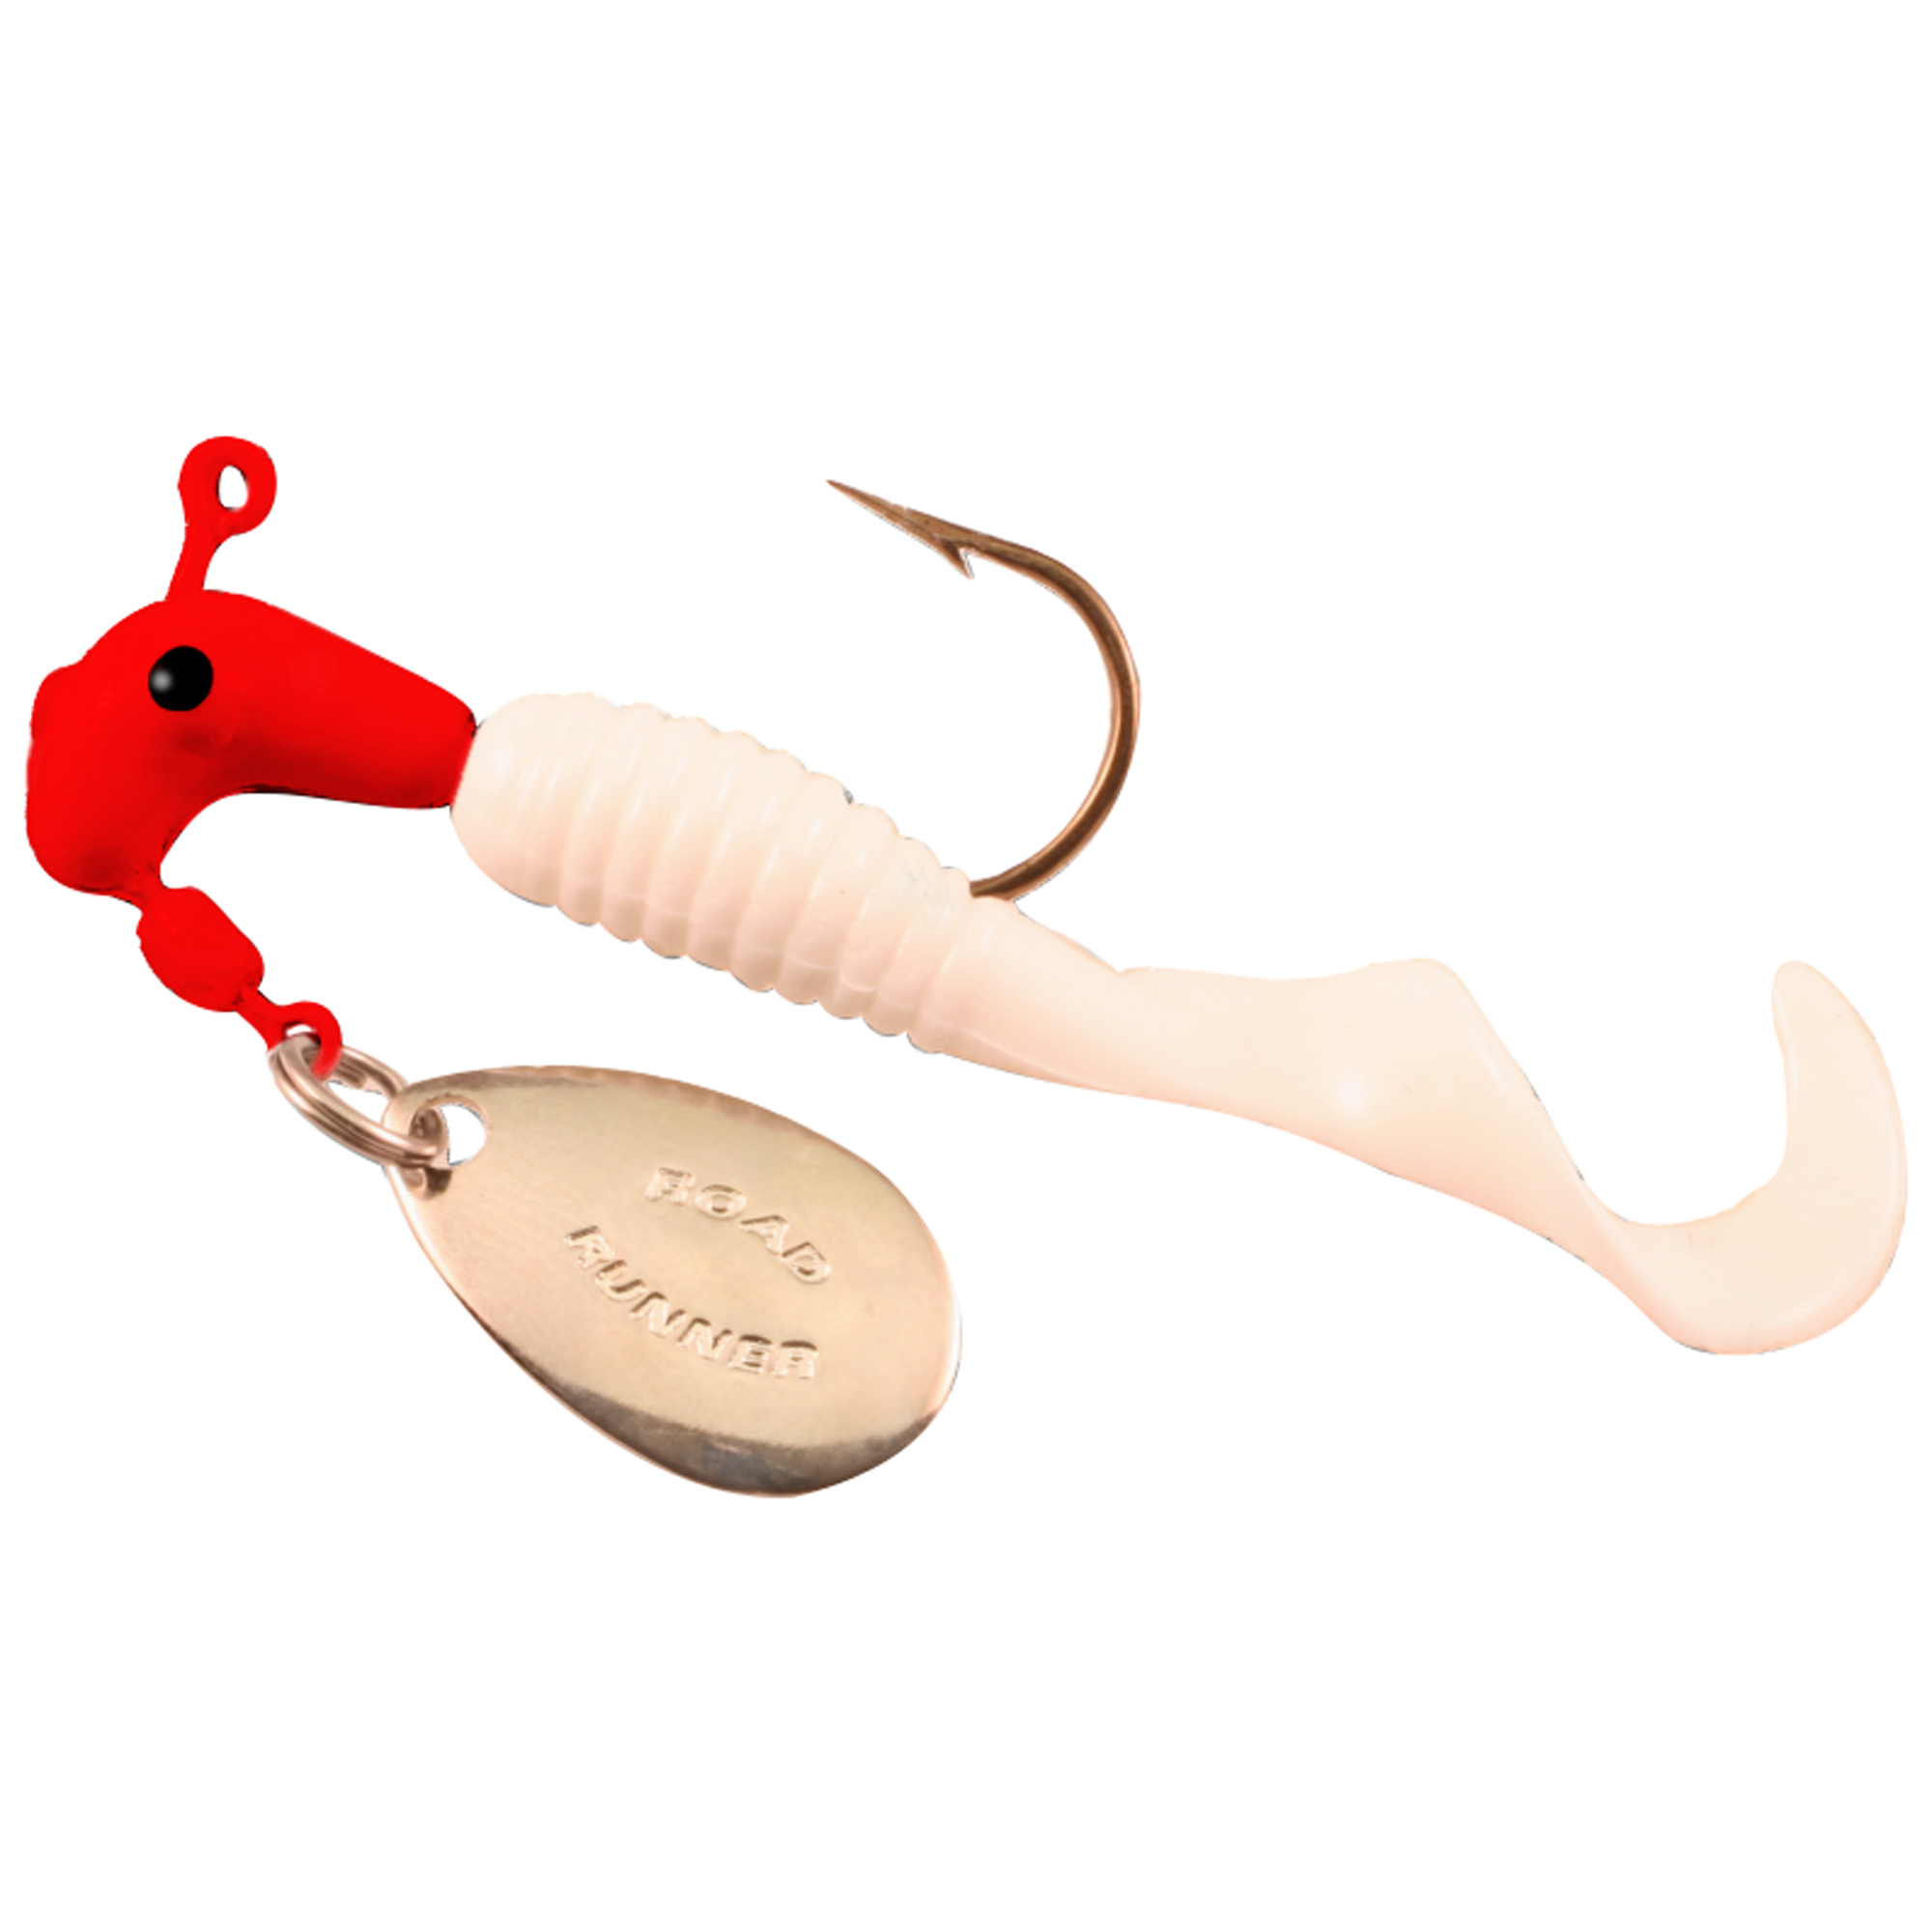 Road Runner 1652-048 Pro Series Curly Tail Jig With Spinner 1/16 oz 